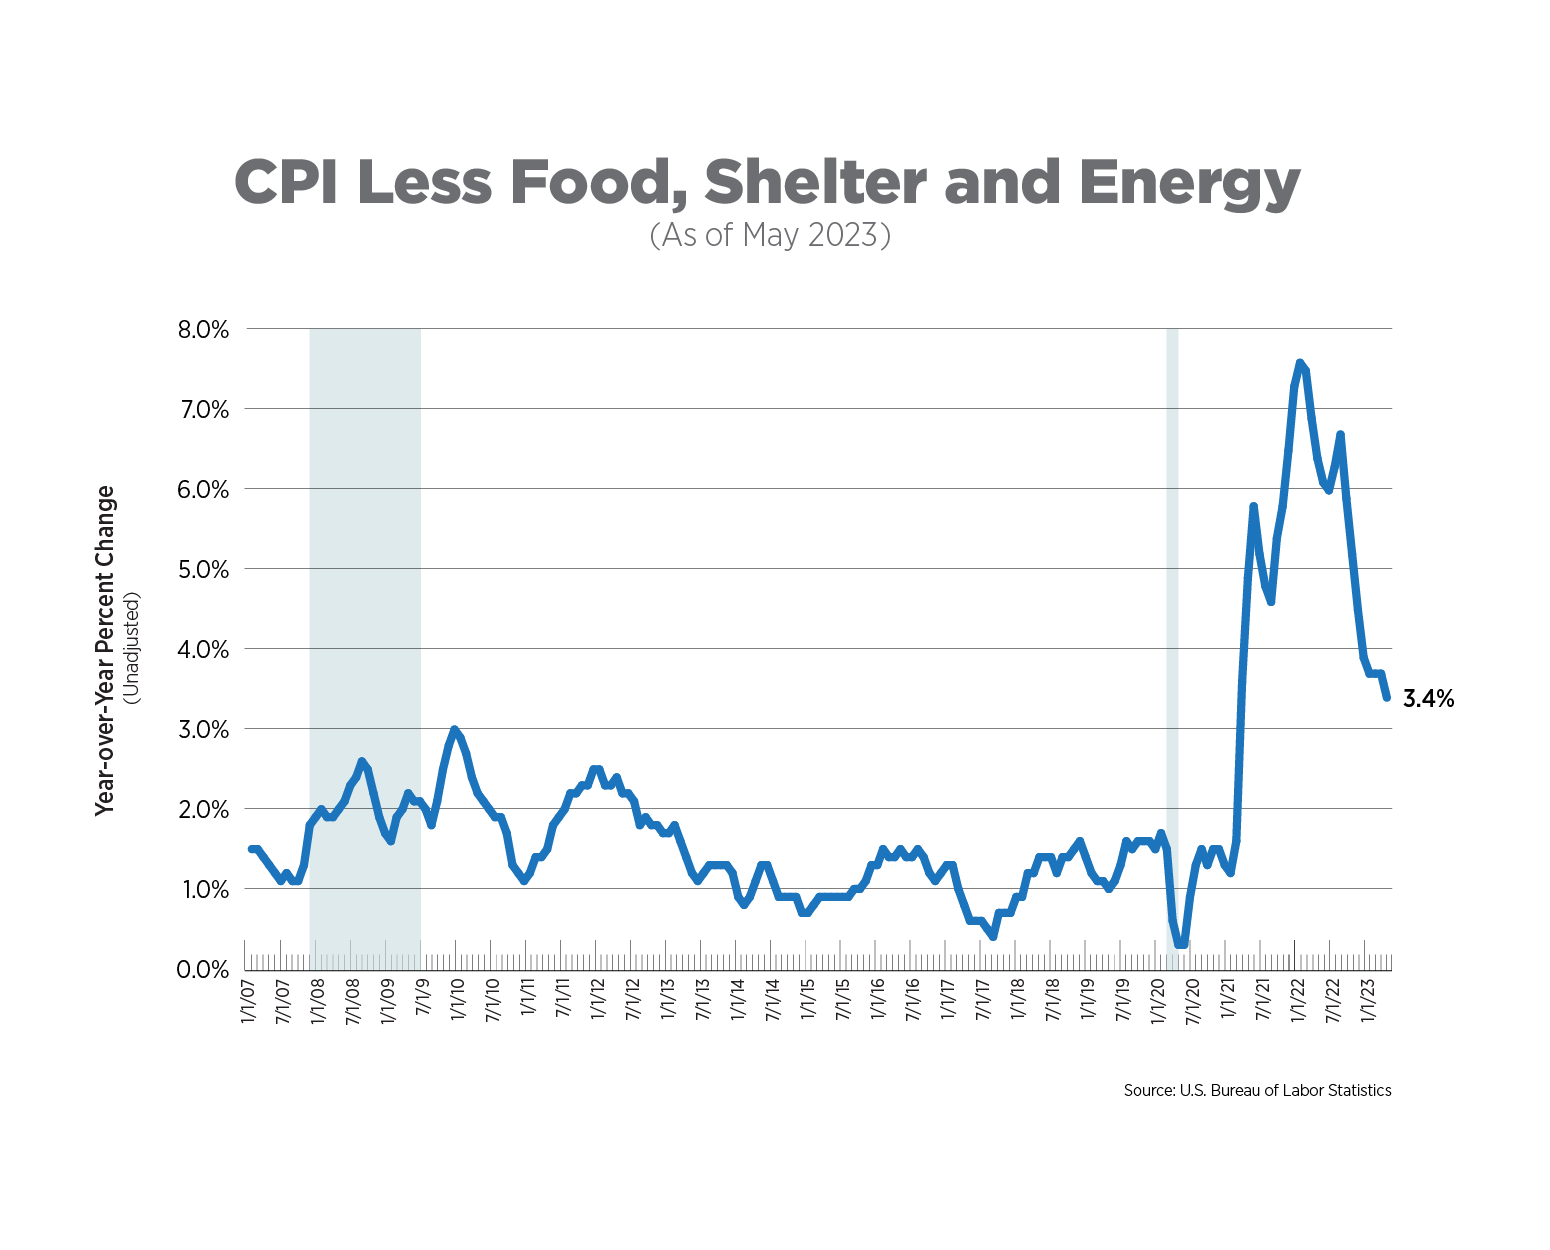 cpi less food, shelter, and energy as of may 2023